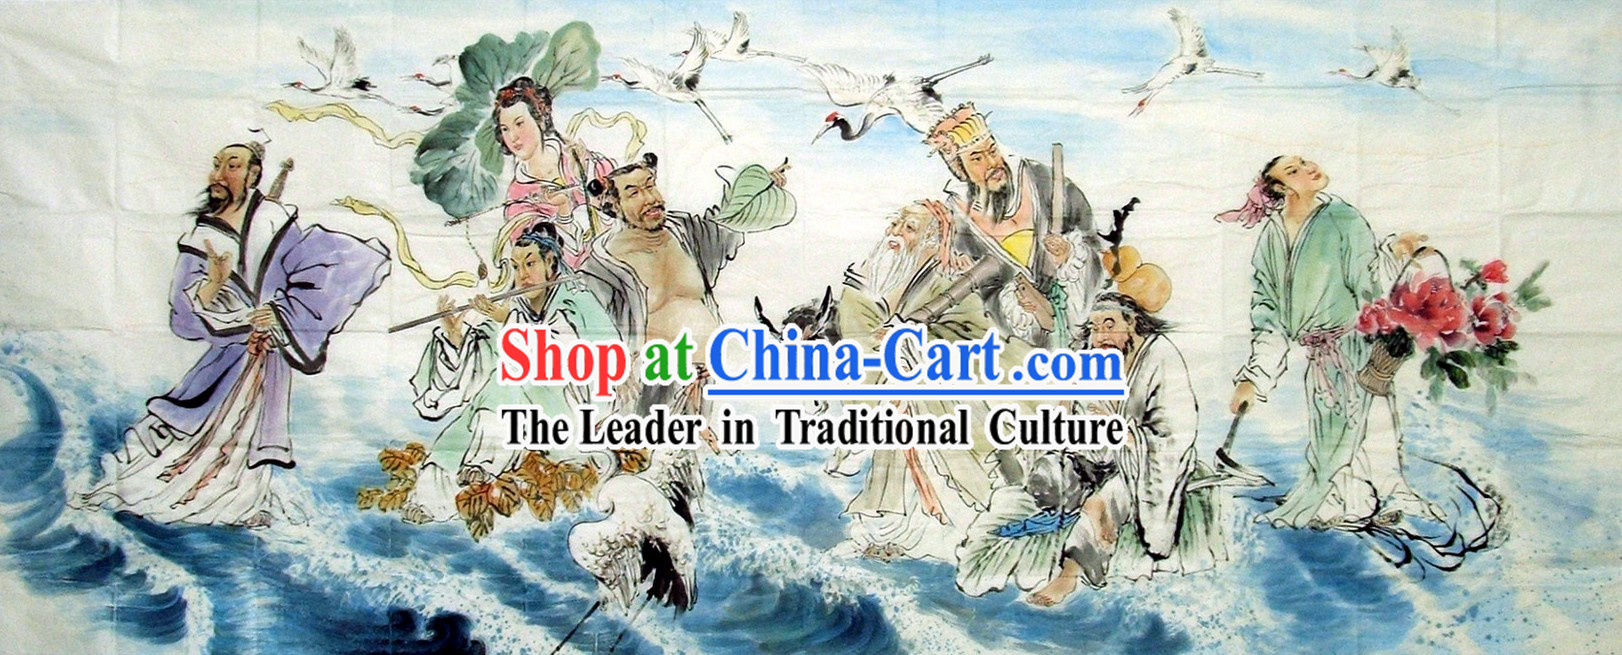 Traditional Chinese Painting - The Eight Immortals Crossing the Sea